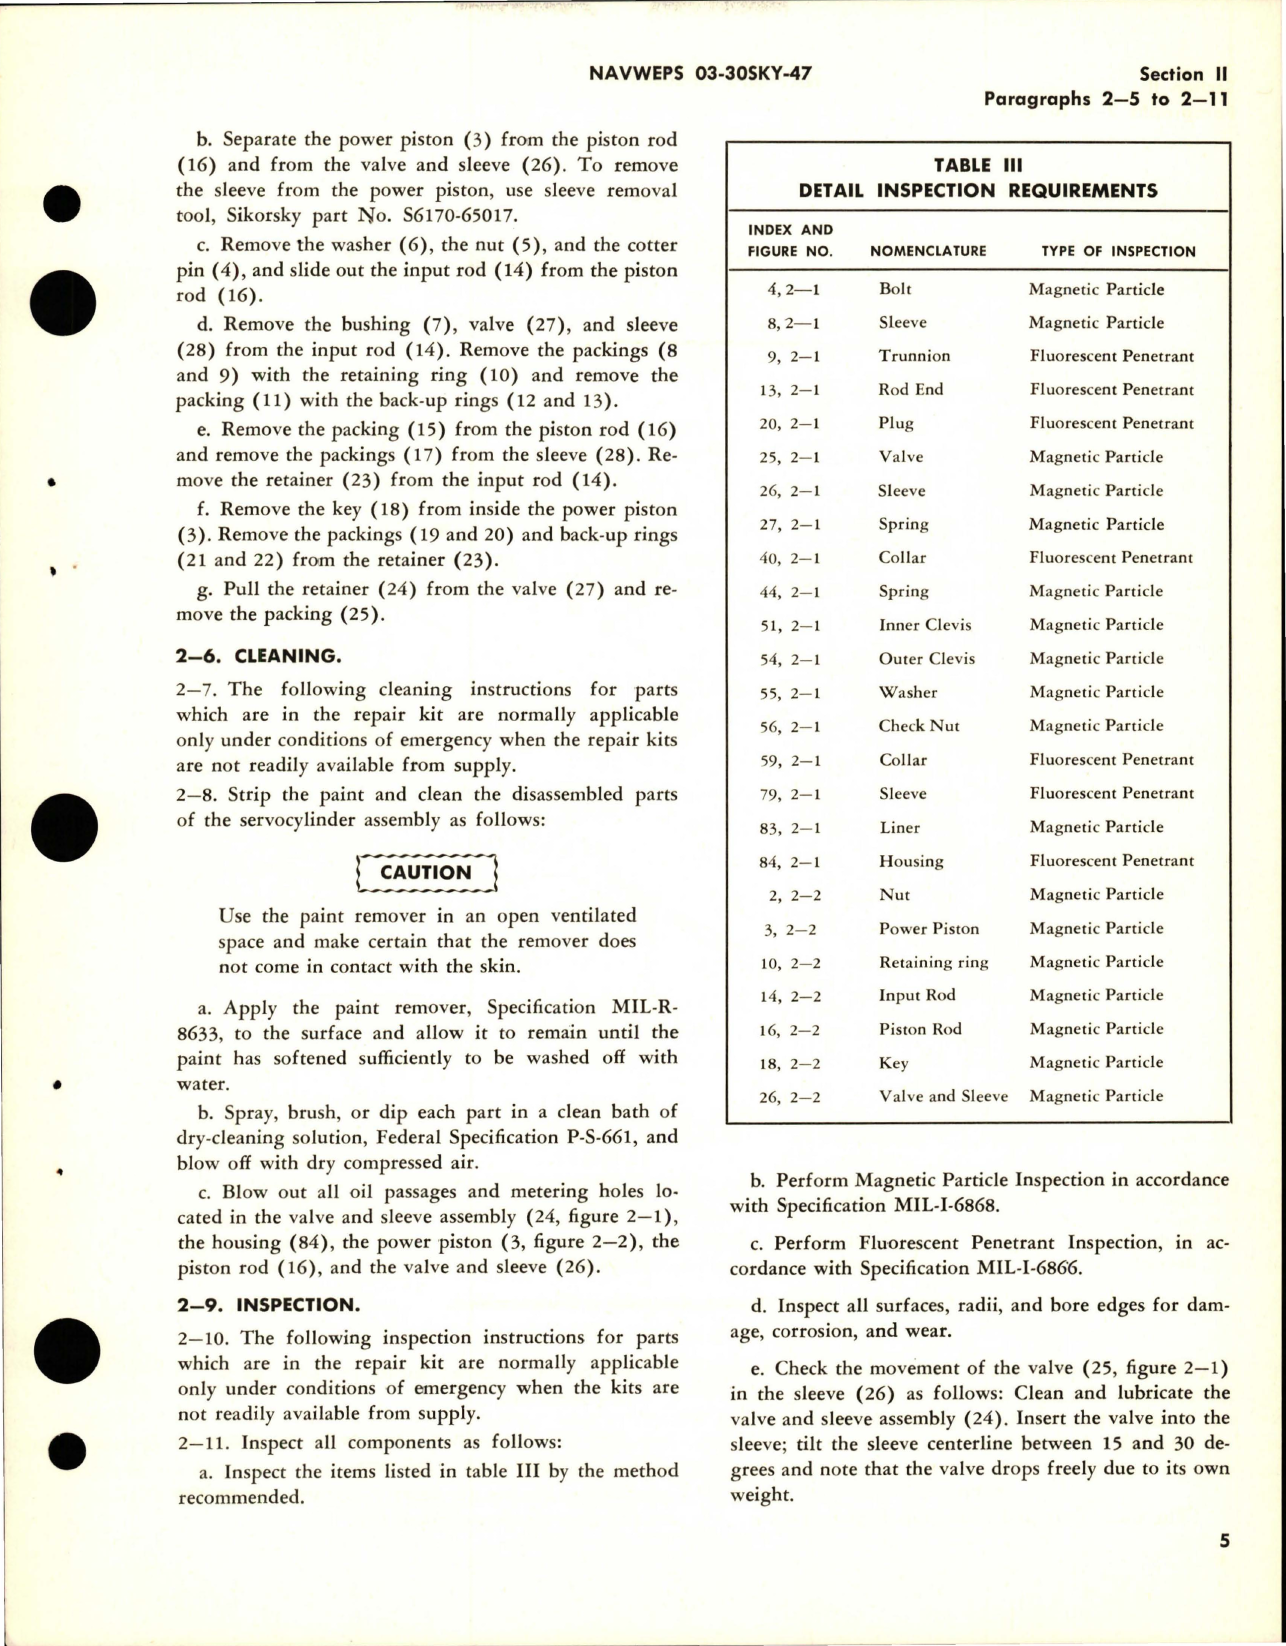 Sample page 9 from AirCorps Library document: Overhaul Instructions for Primary Servocylinder Assembly - Parts S6165-20260-1, S6165-20260-2, S6165-20260-3, and S6165-20260-4